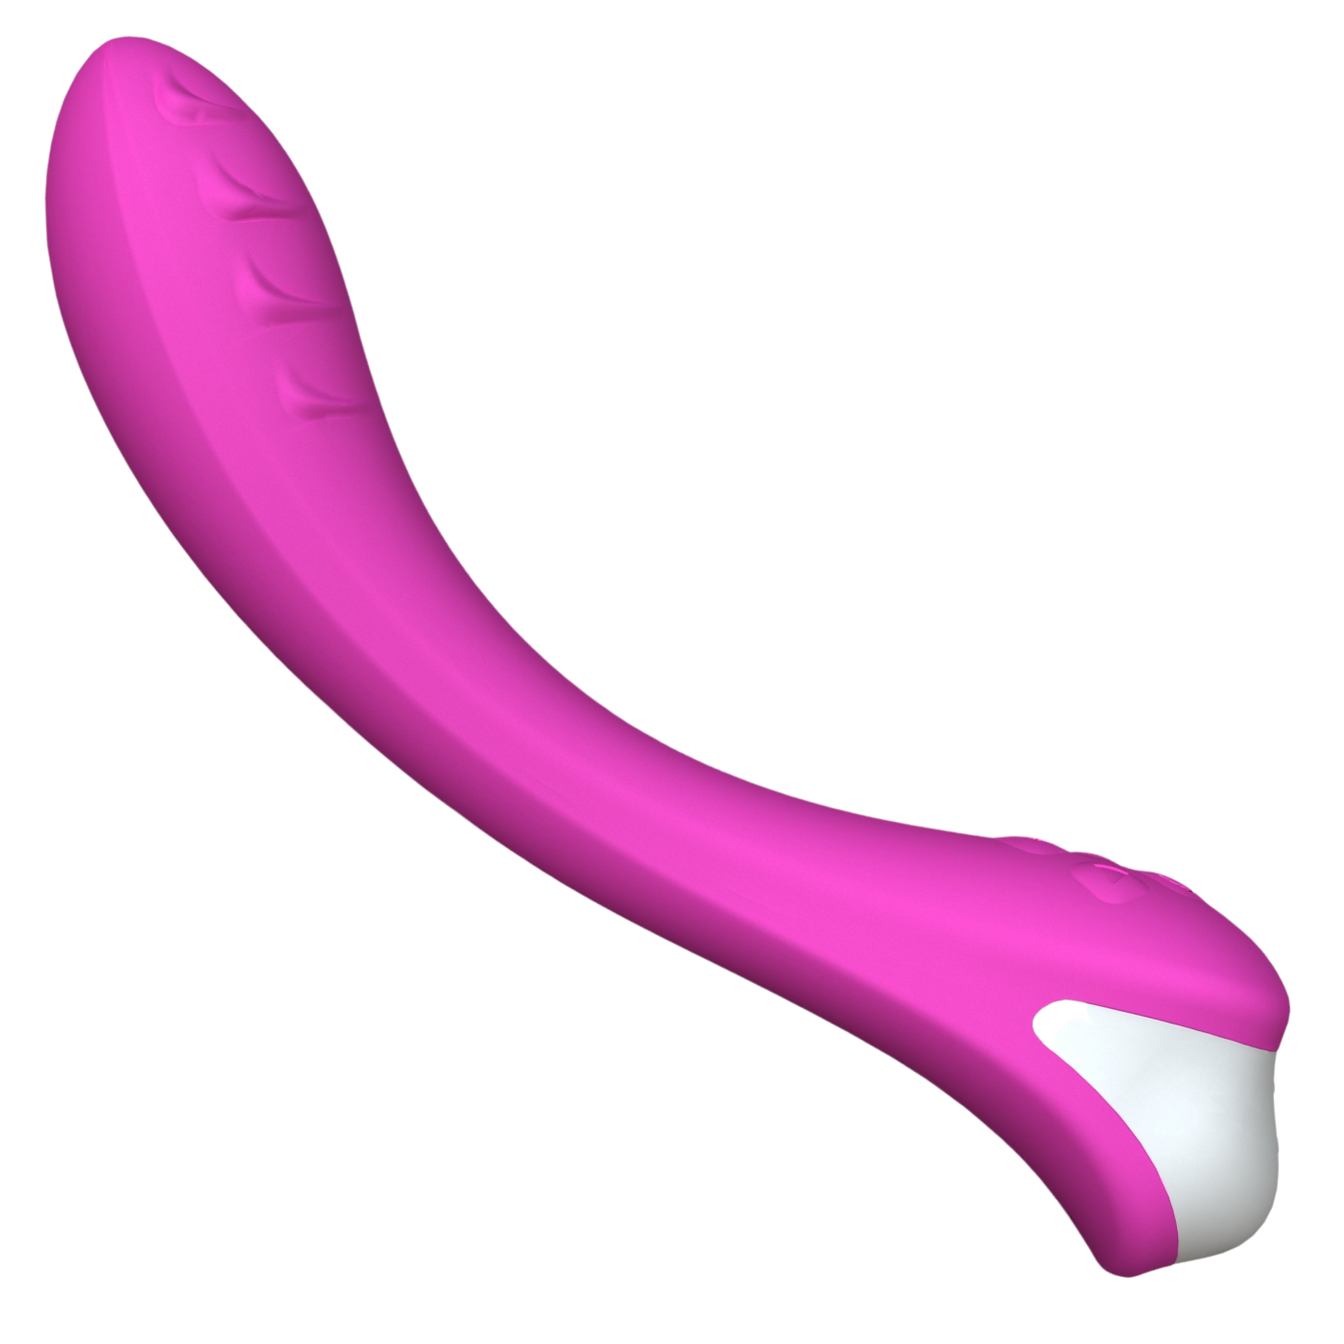 Hot pink gspot vibrator curved